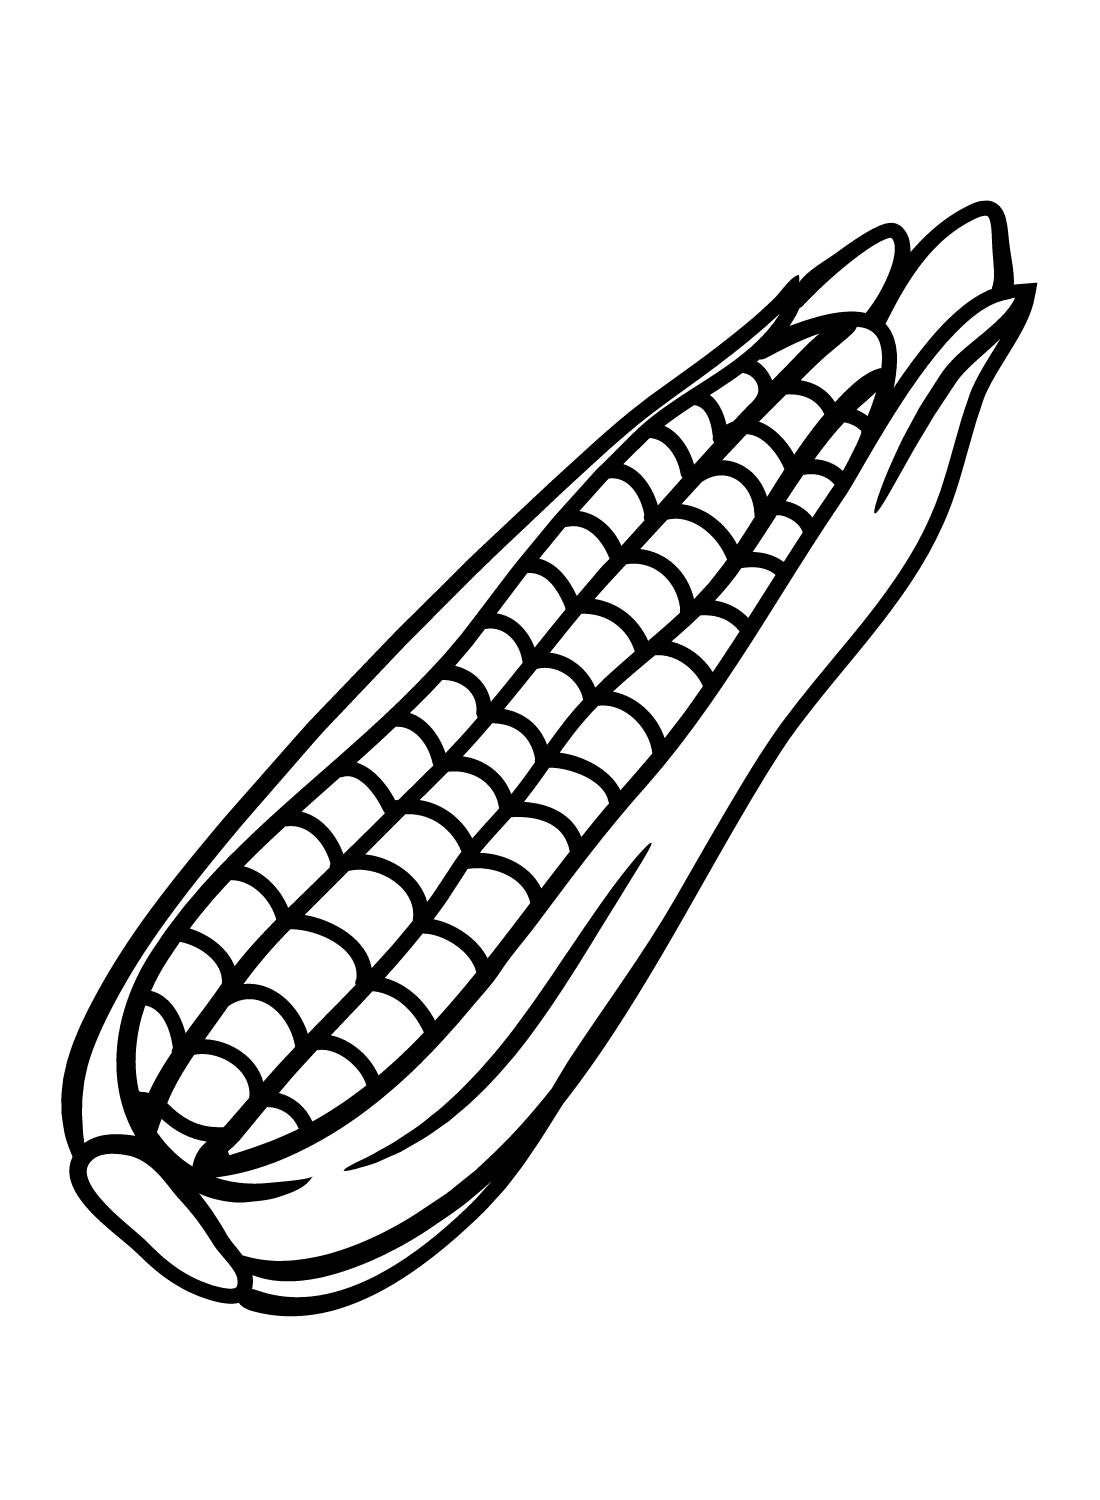 Easy Corn Drawing from Corn